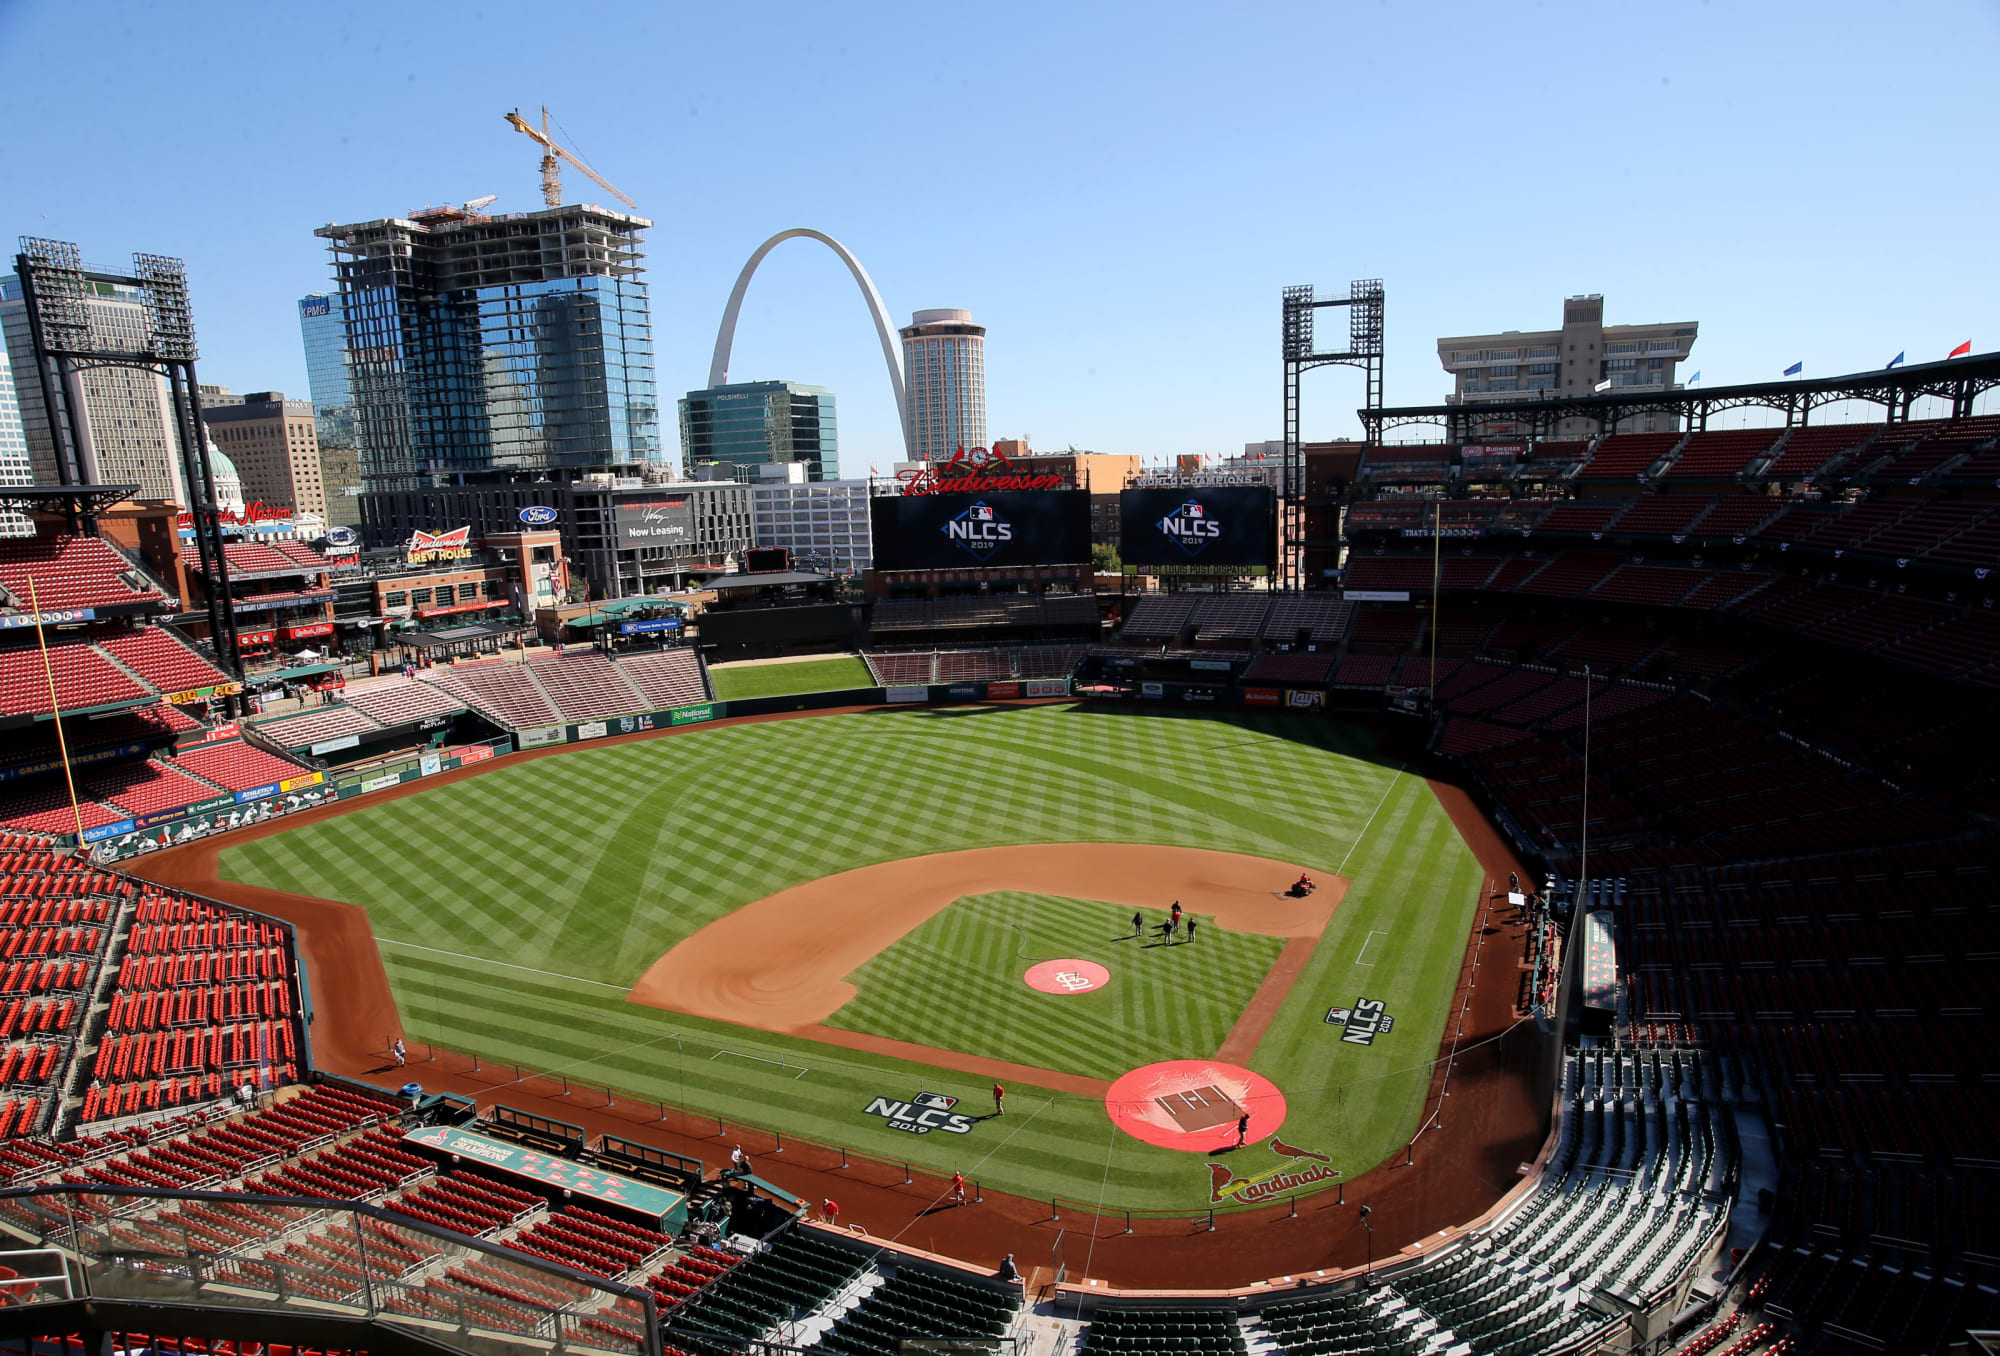 St. Louis Cardinals projected to lose $136M in 2020